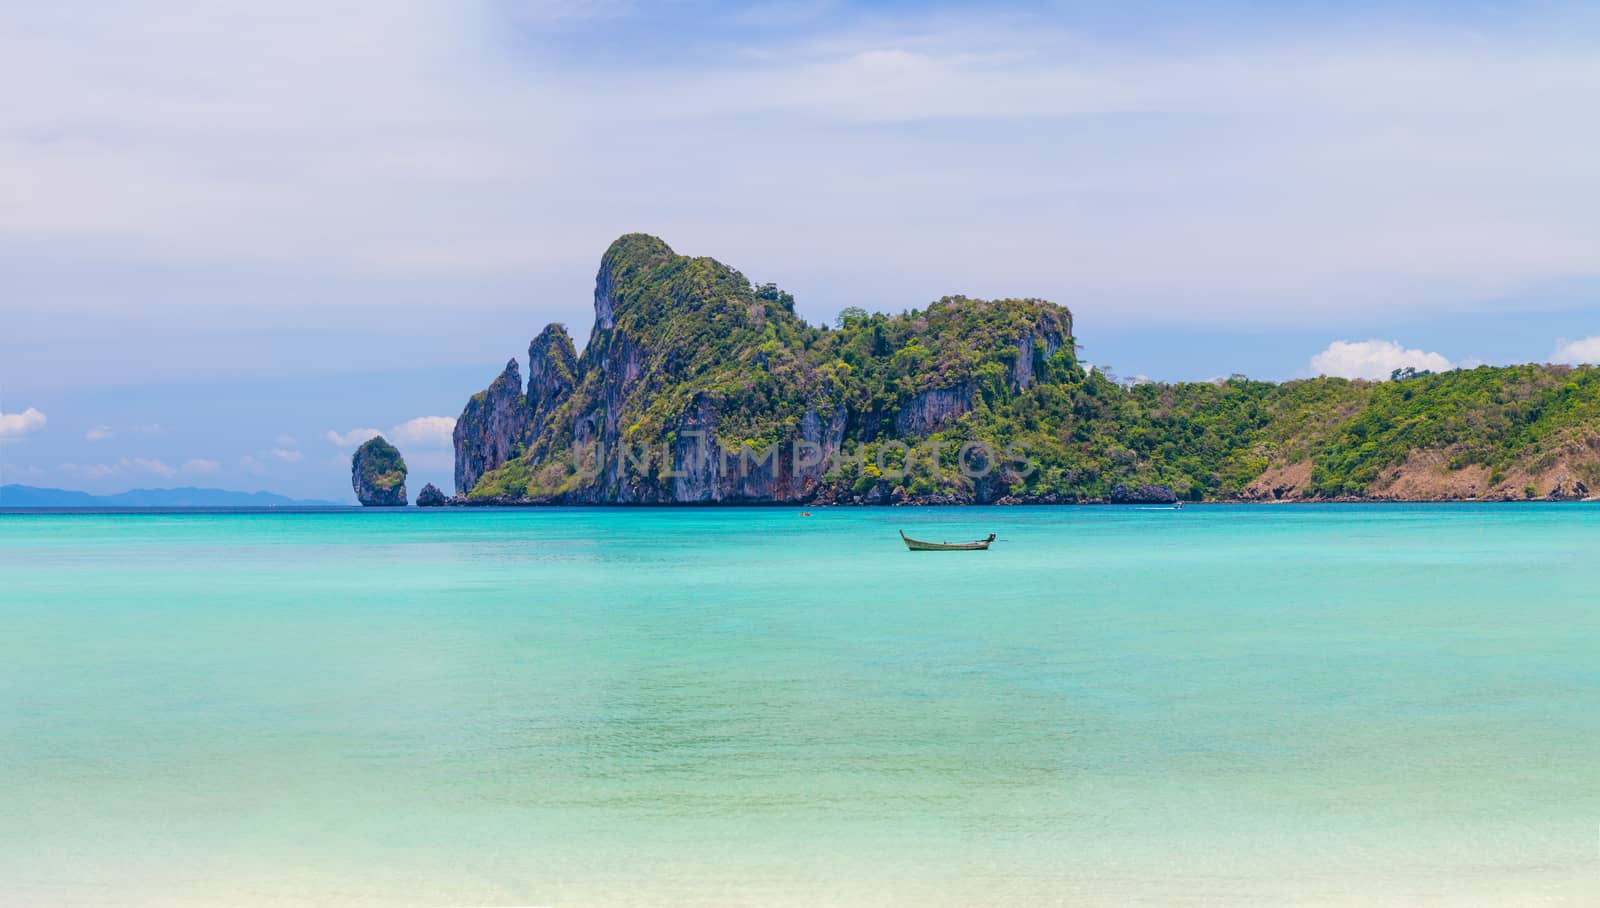 Beauty beach and limestone rocks in Phi Phi islands Thailand